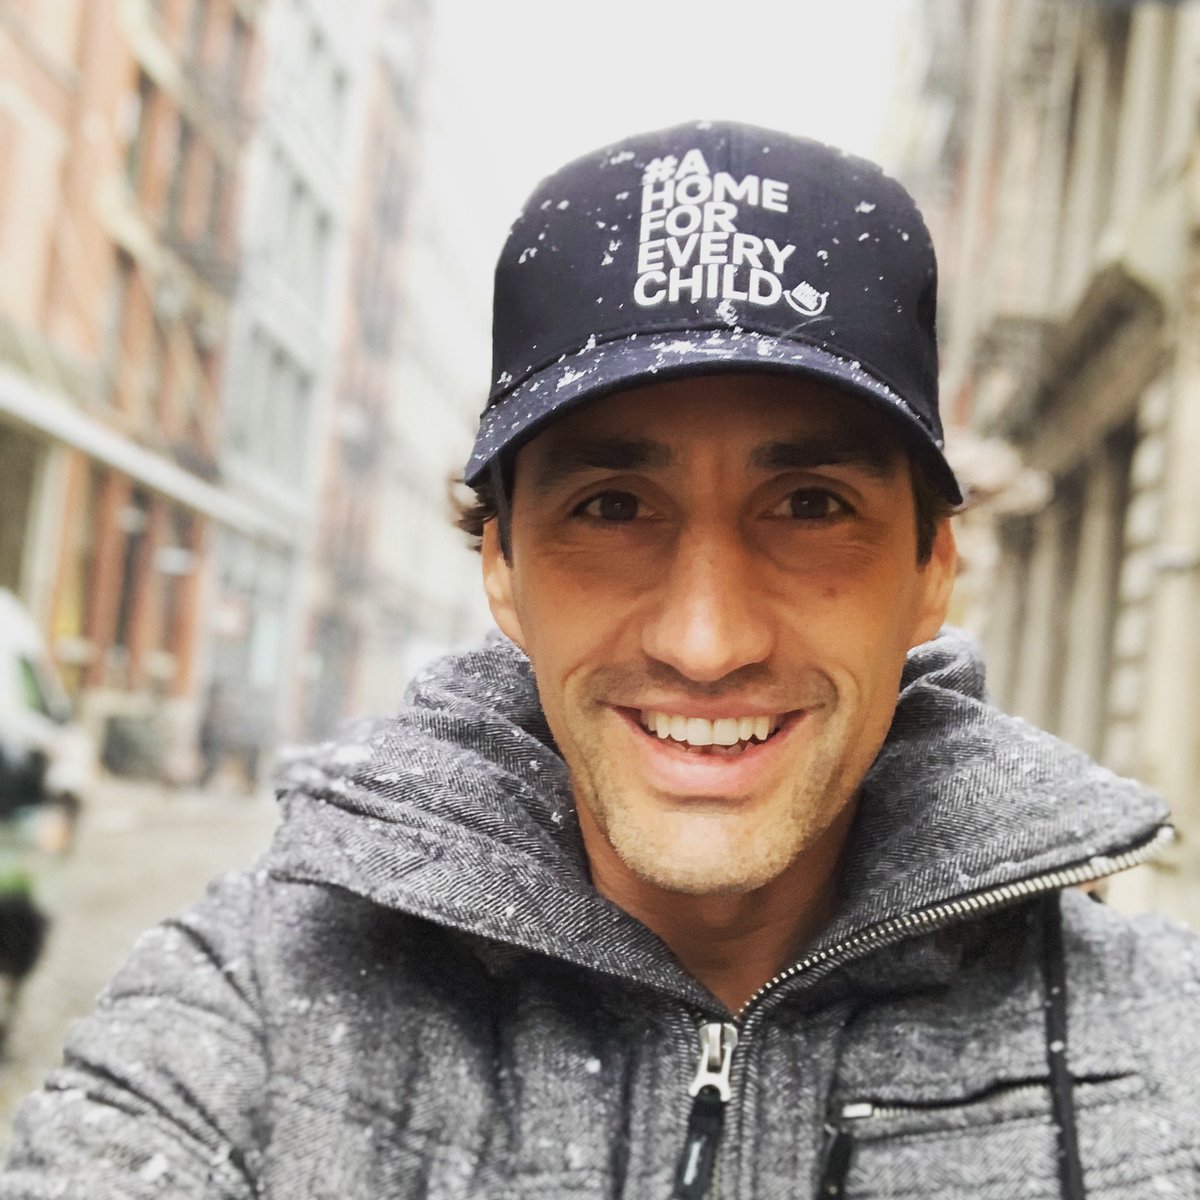 In NYC and caught up with a pal who reminded me it’s adoption awareness month and gave me this hat.
Everyone at @adoptchangeau are doing amazing things.

#ahomeforeverychild